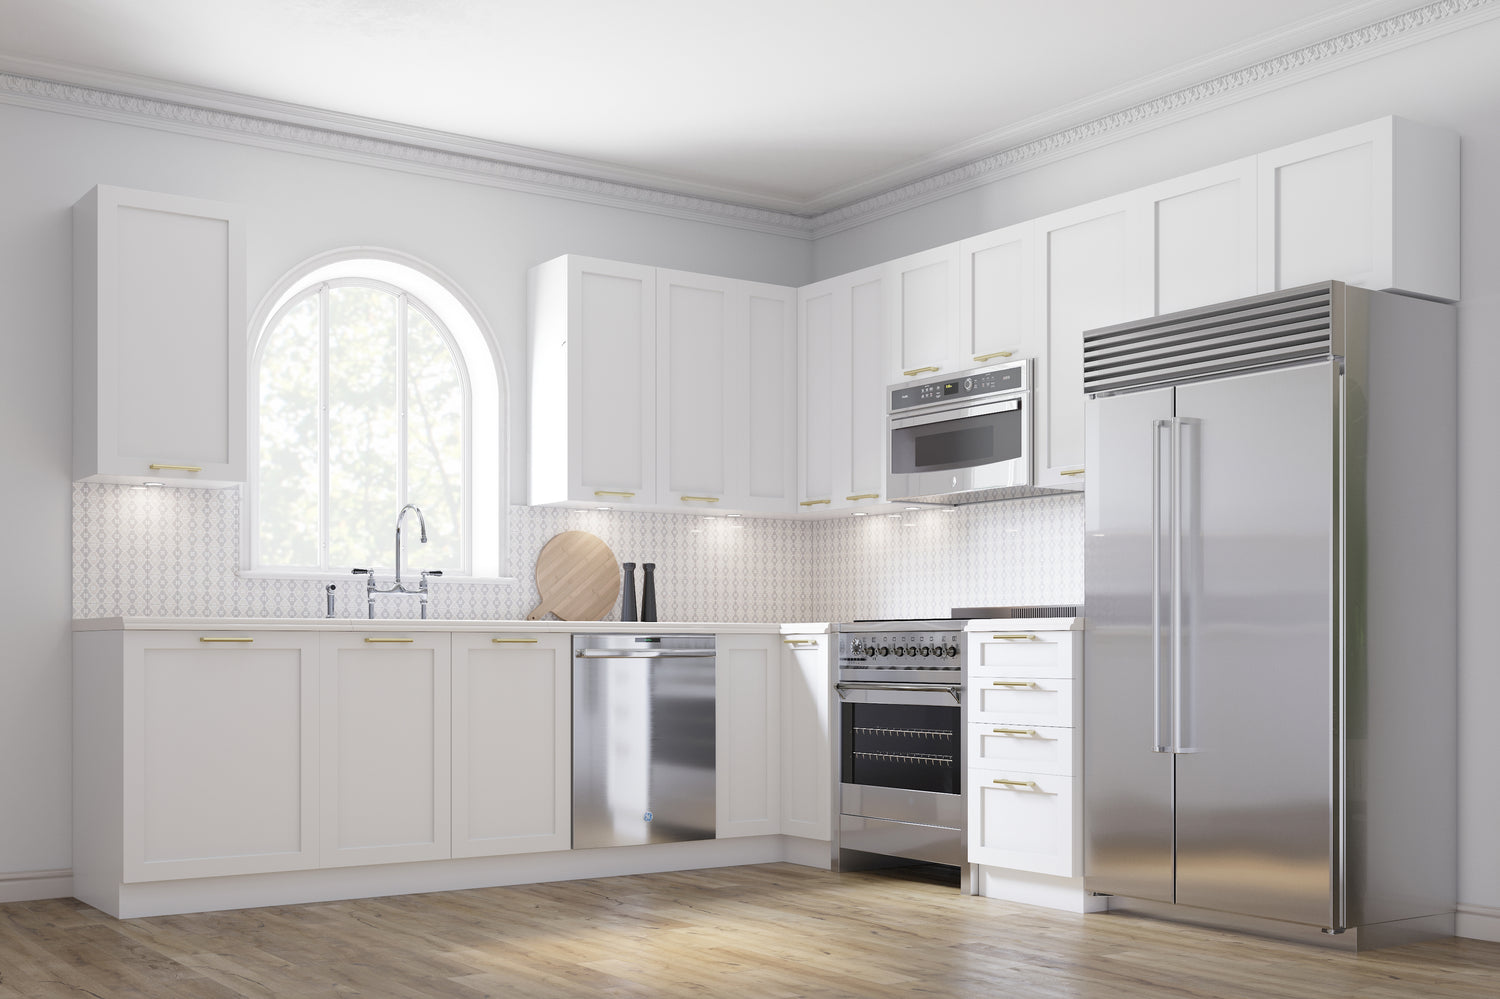 Quick Assemble Modern Style with Soft Close, 21 in White Shaker Wall Kitchen Cabinet (21 in W x 12 D x 30 in H)